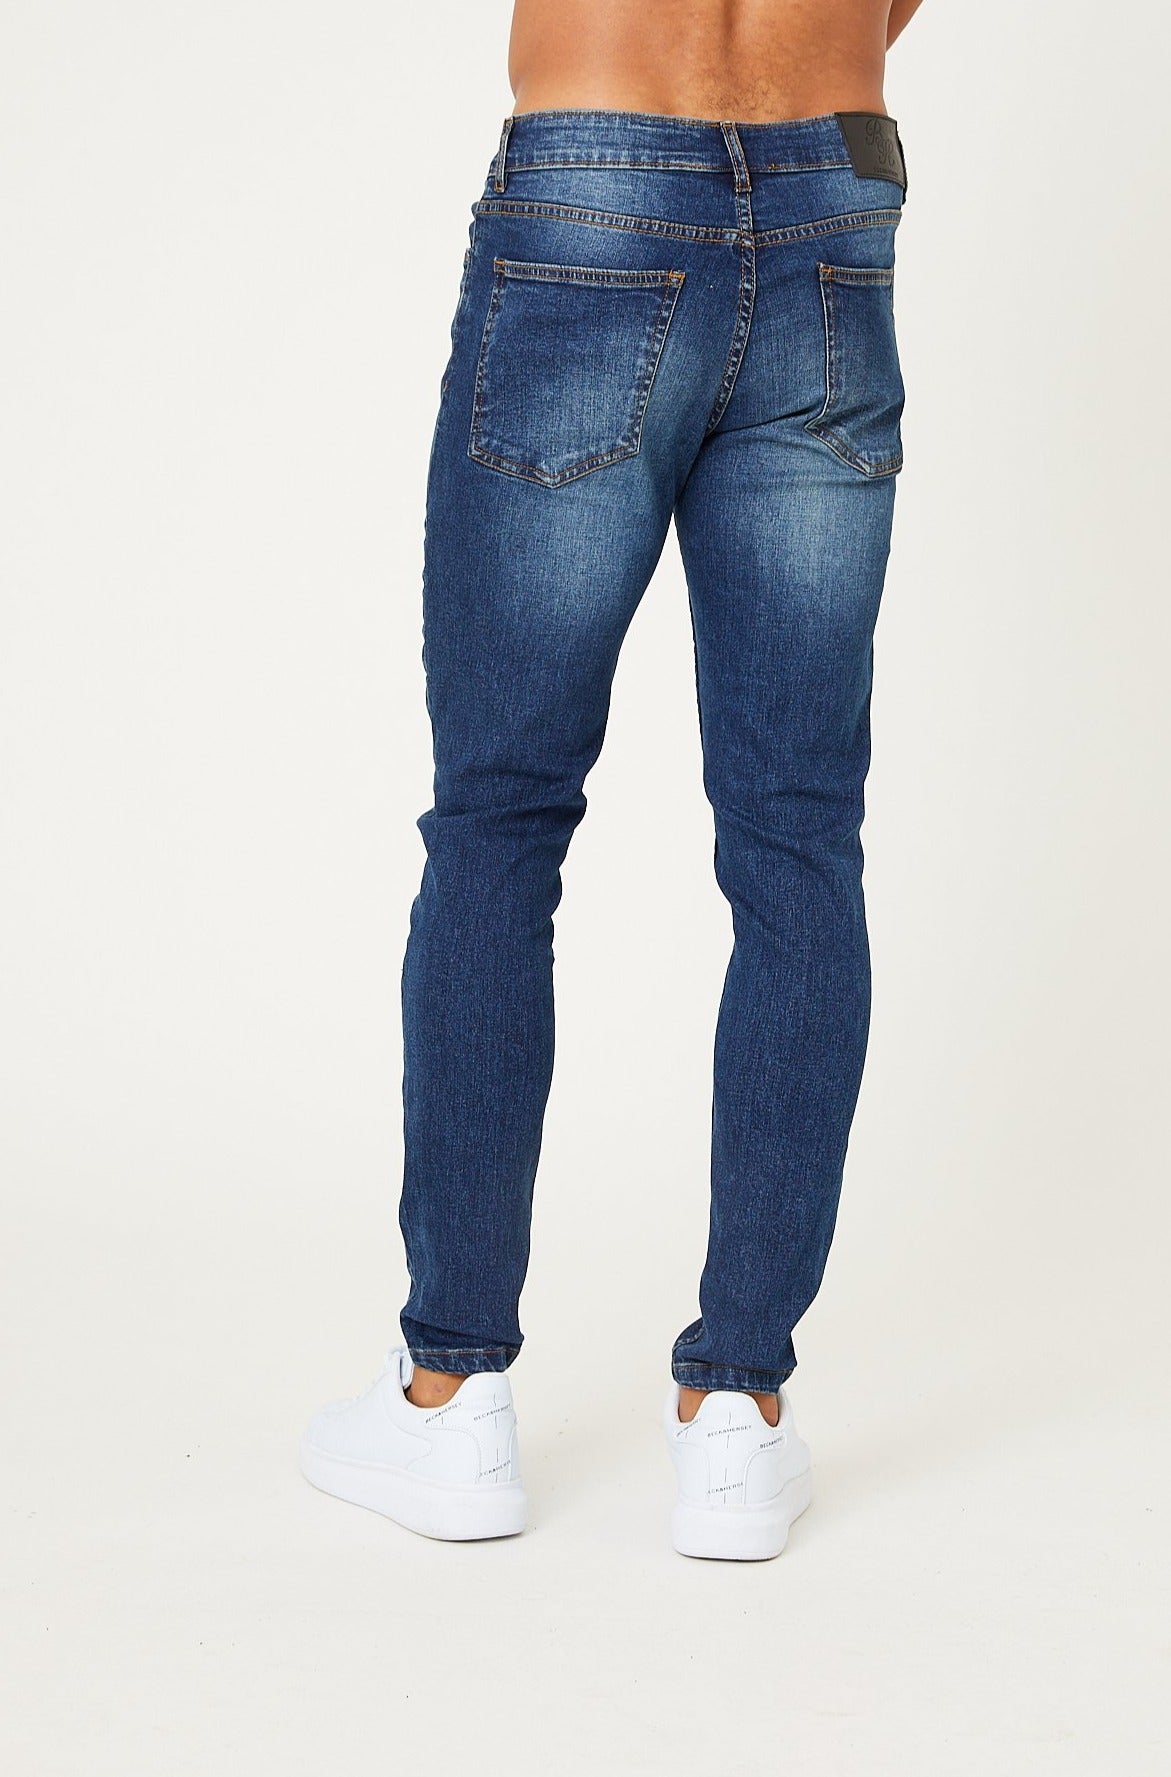 NEW BROMLEY Jeans - Mid Blue